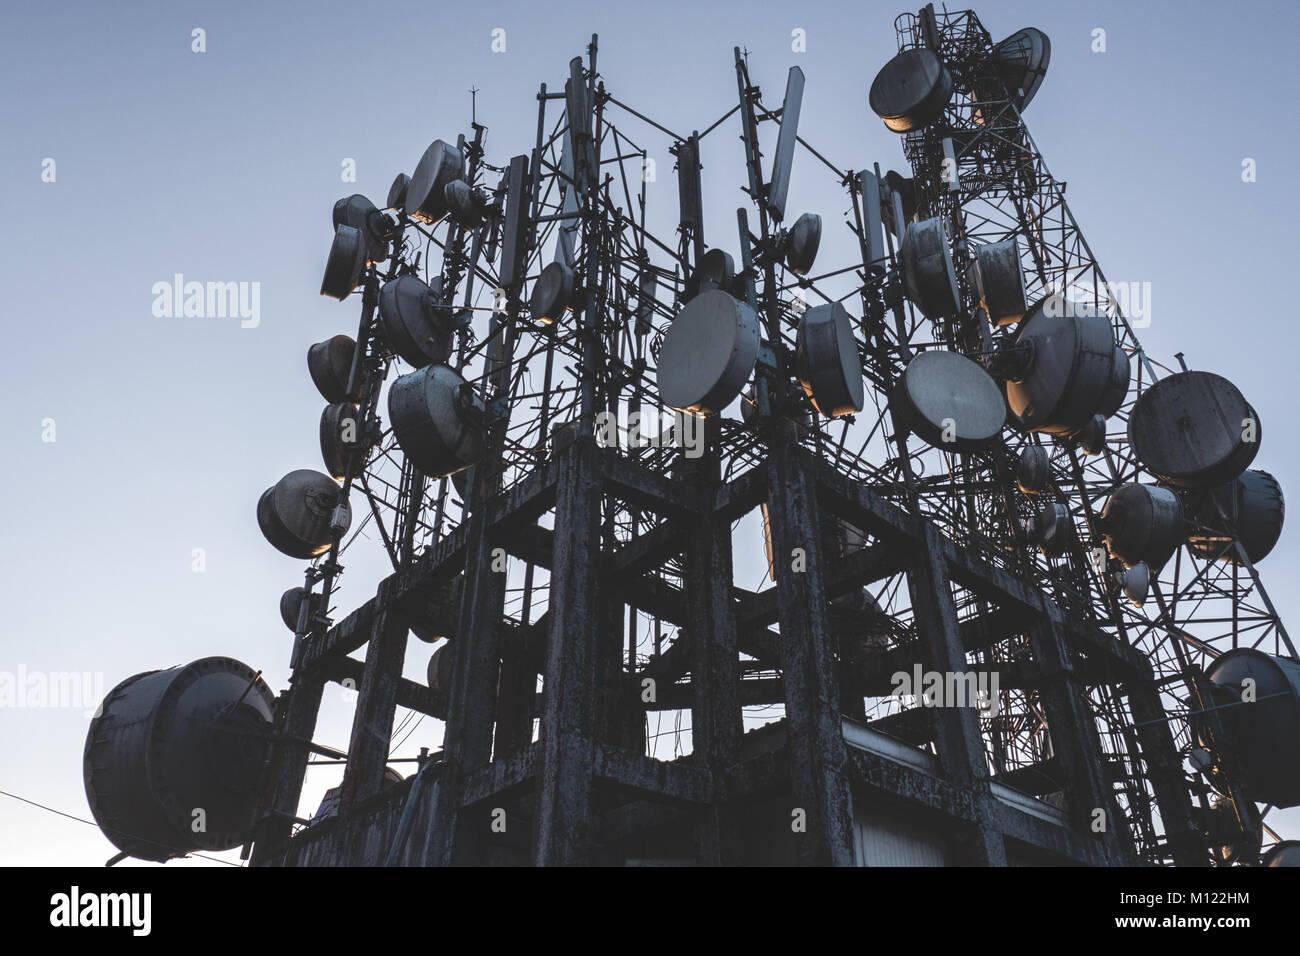 Aerial Tower covered in Satellites, Tiger Hill, Darjeerling, India Stock Photo